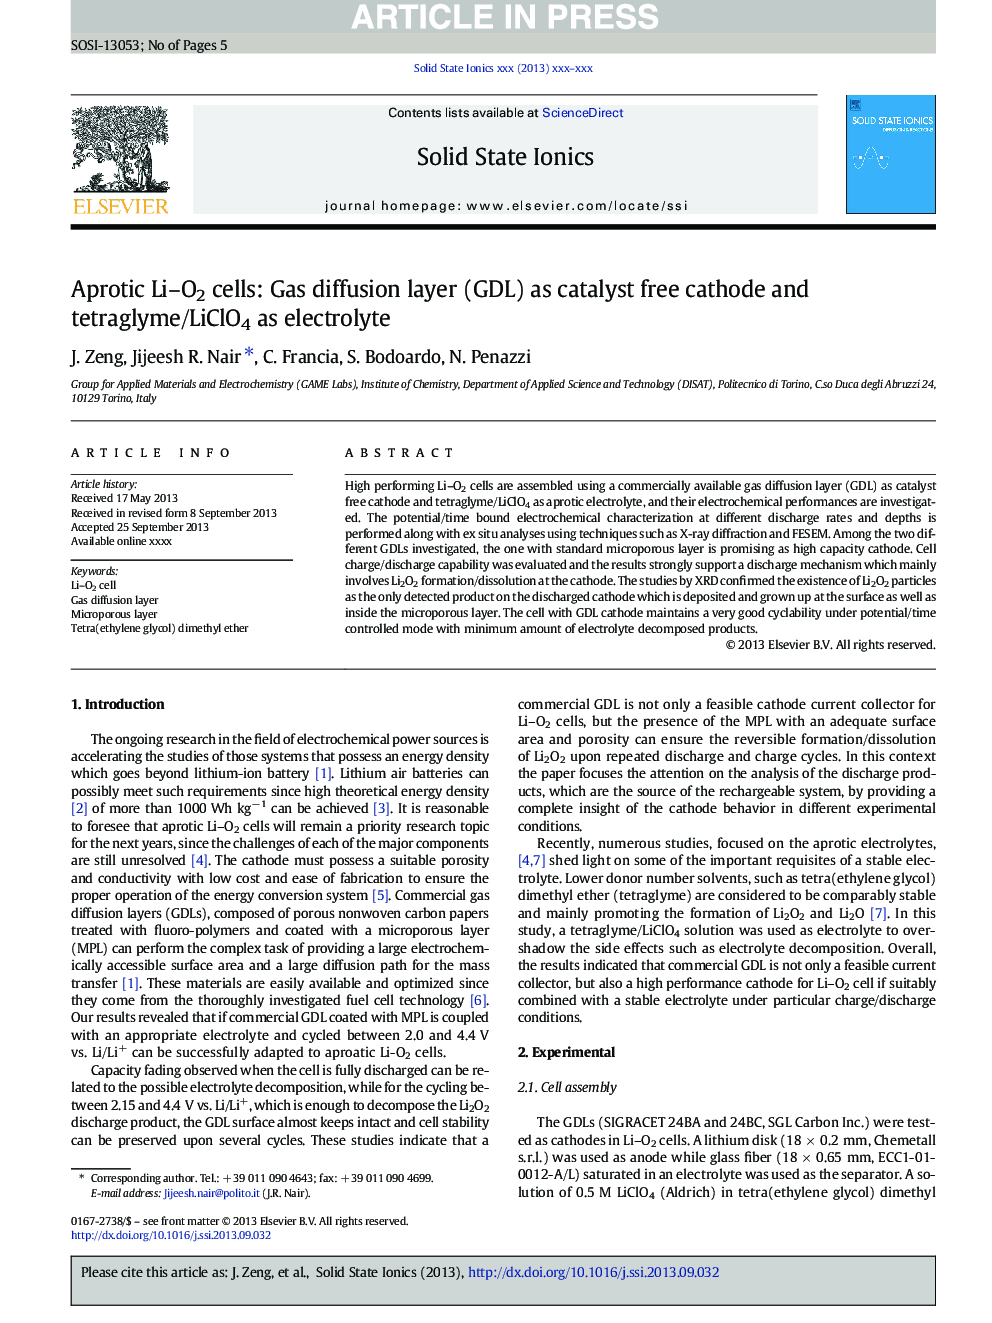 Aprotic Li-O2 cells: Gas diffusion layer (GDL) as catalyst free cathode and tetraglyme/LiClO4 as electrolyte